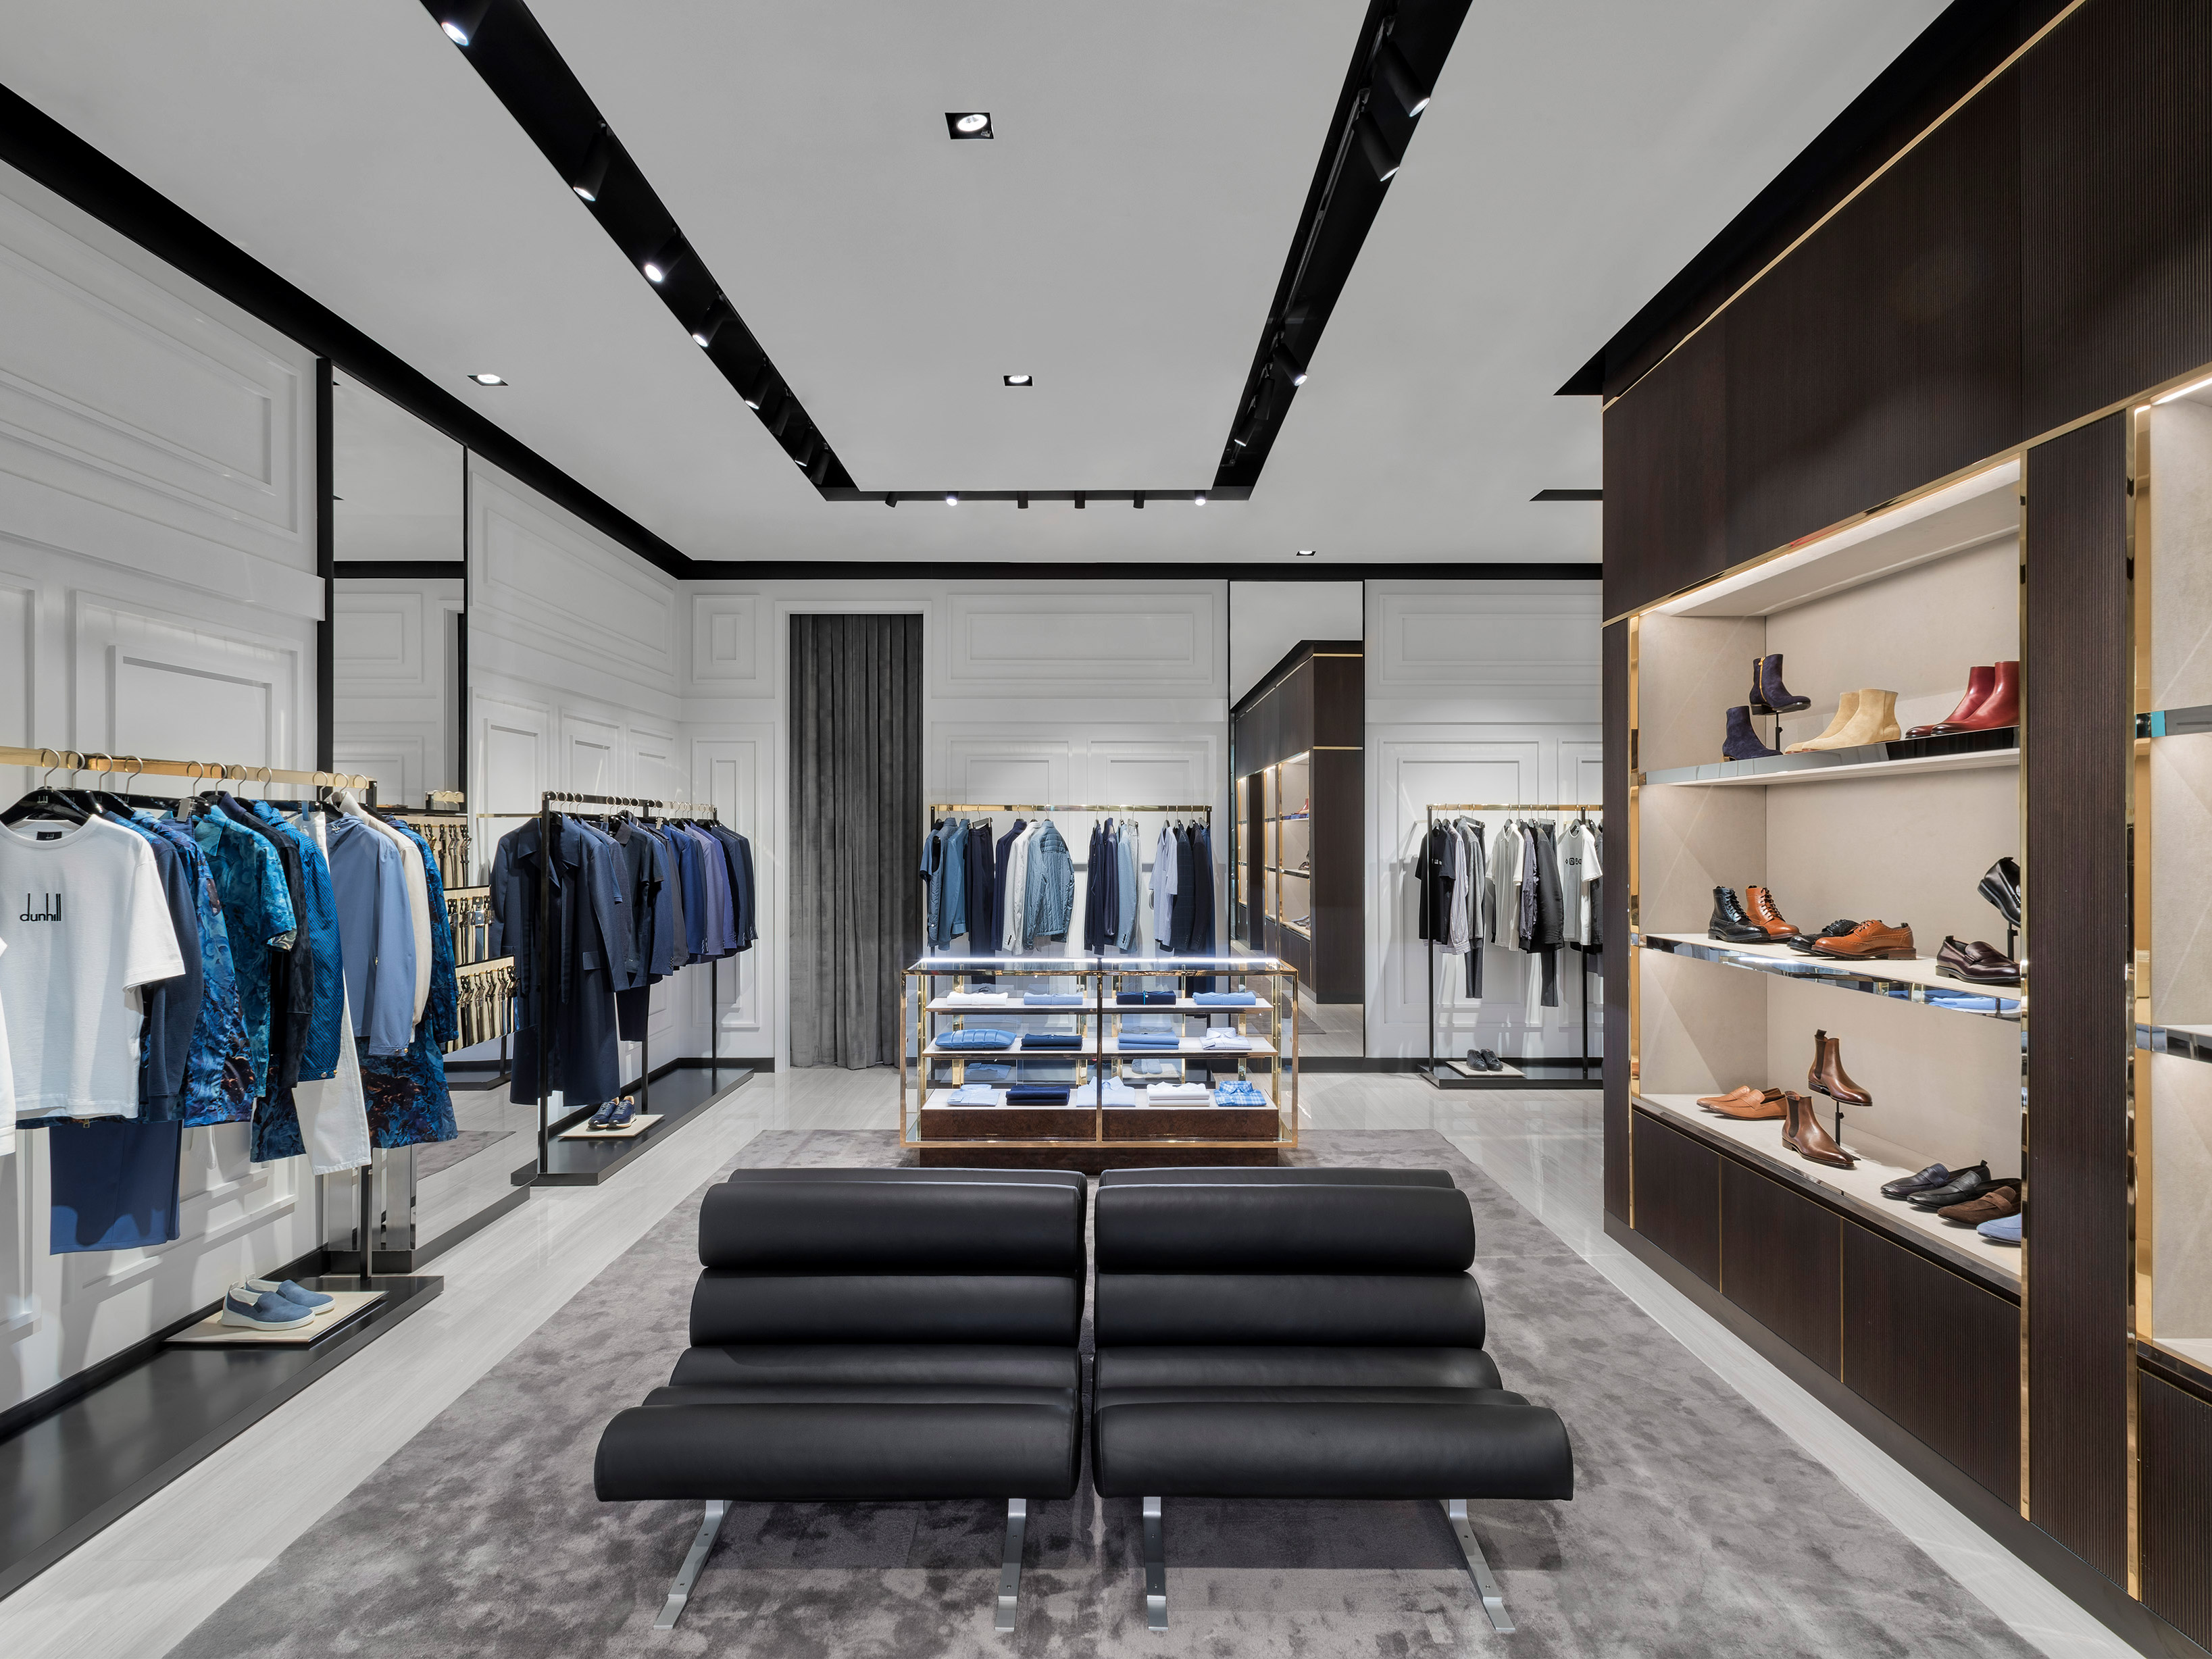 Louis Vuitton South Coast Plaza - Finished Store - Final on Vimeo